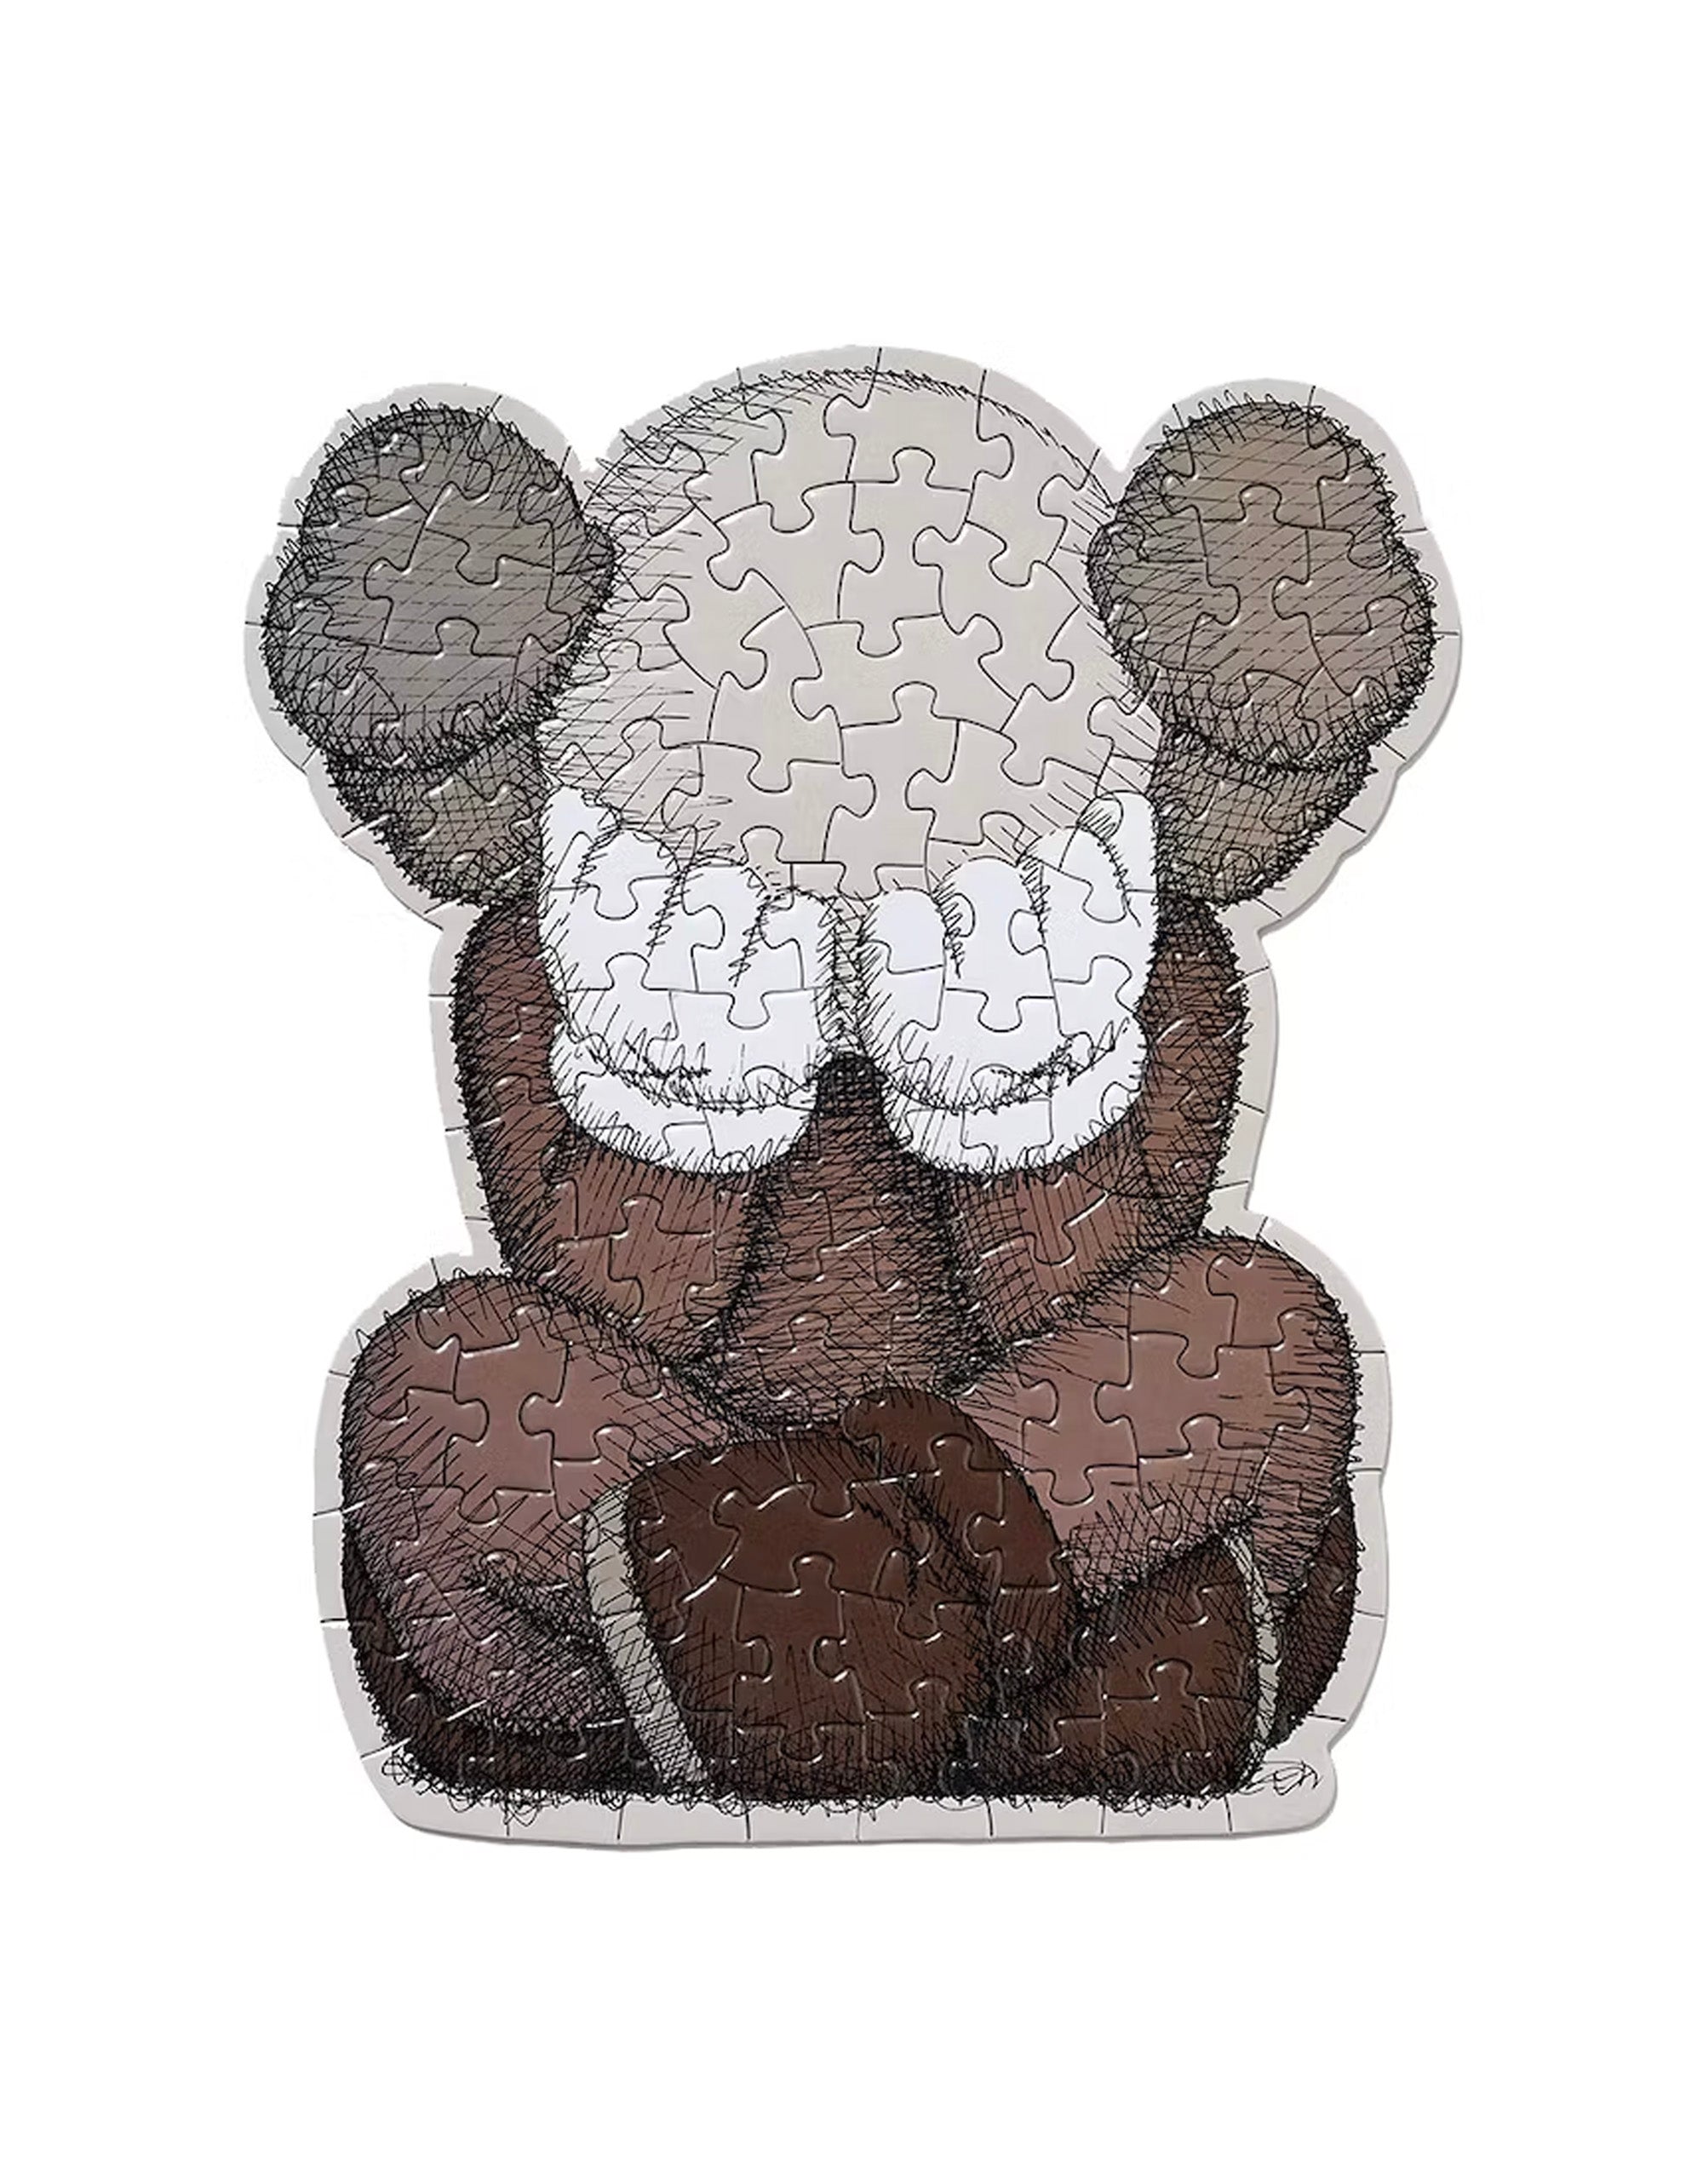 KAWS TOKYO FIRST PUZZLE SEPARATED 100 - その他